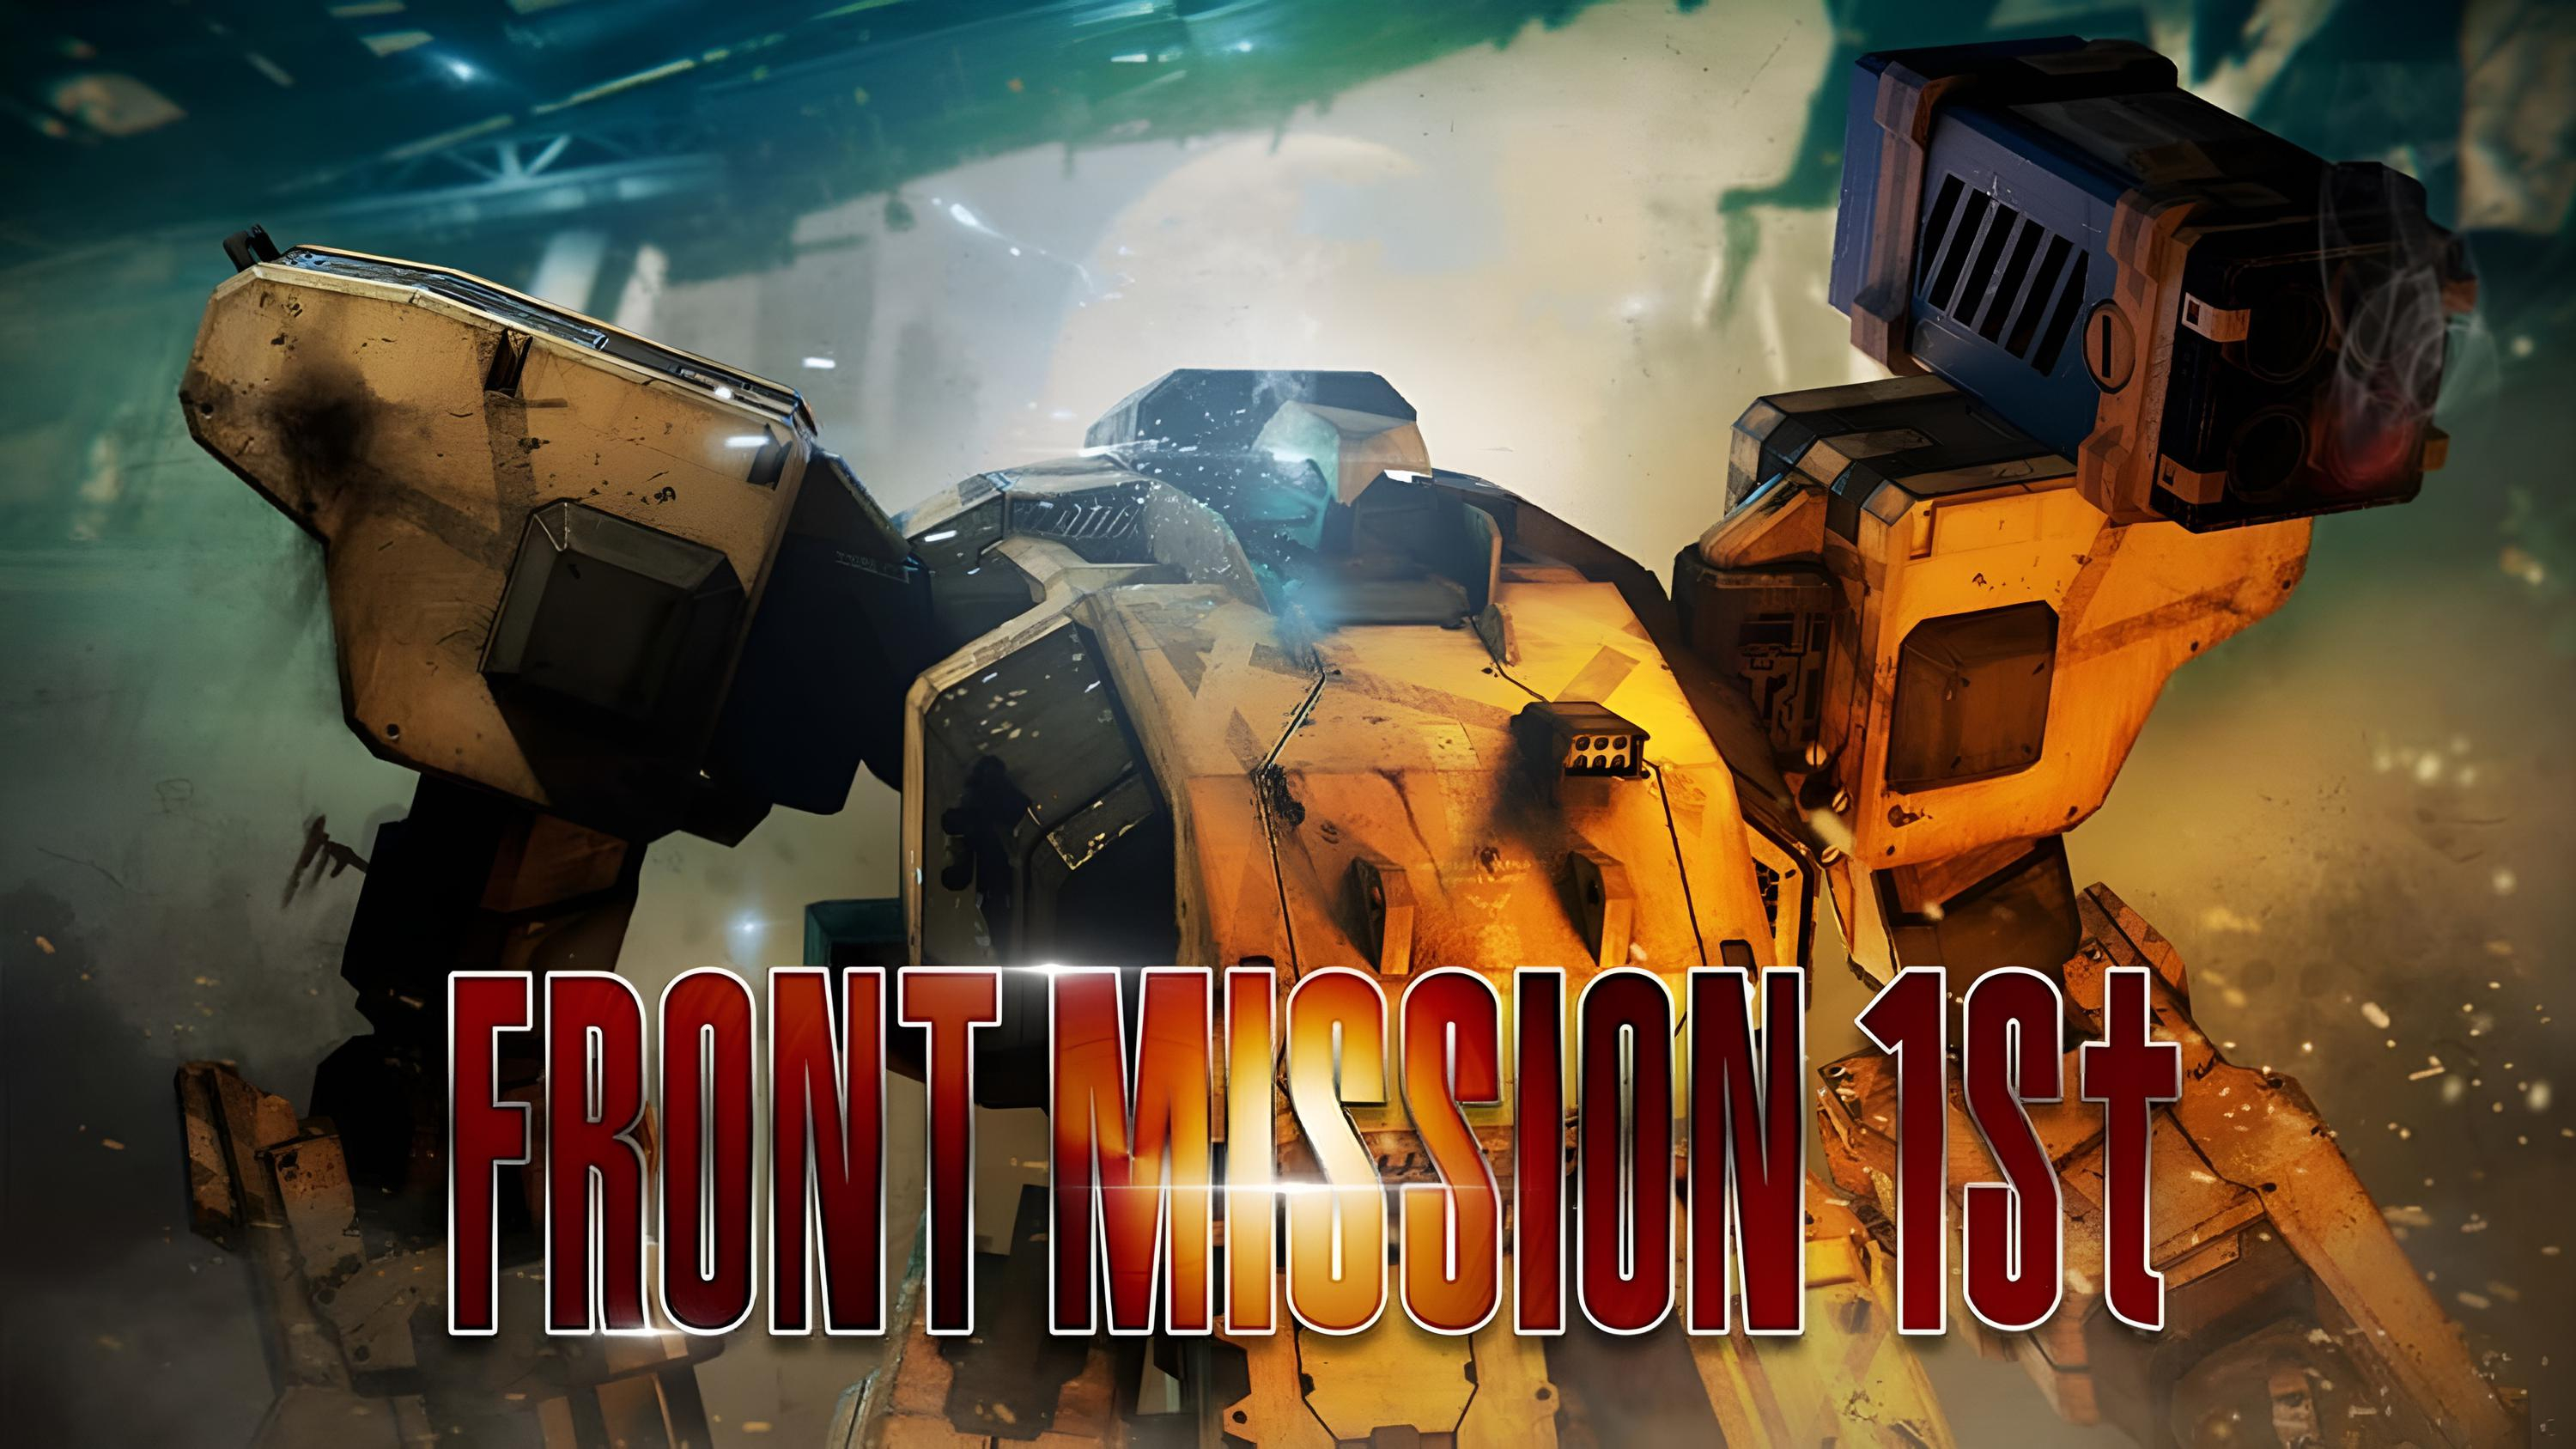 First mission. Front Mission 1 Remake. Front Mission 1st: Remake. Front Mission 2 Remake. Front Mission 1st. Limited Edition.